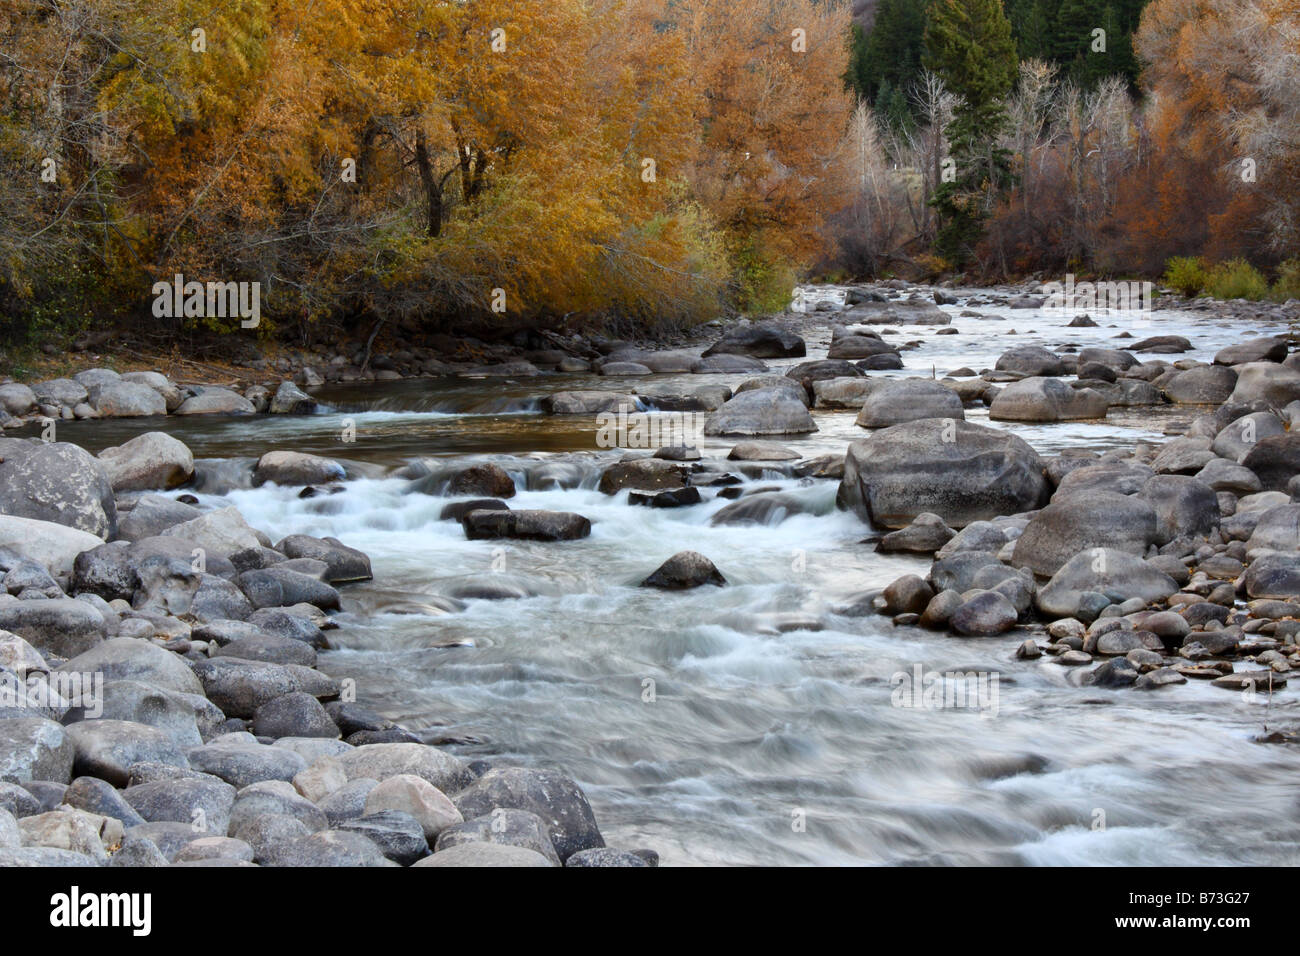 A running river in Colorado during fall. Stock Photo